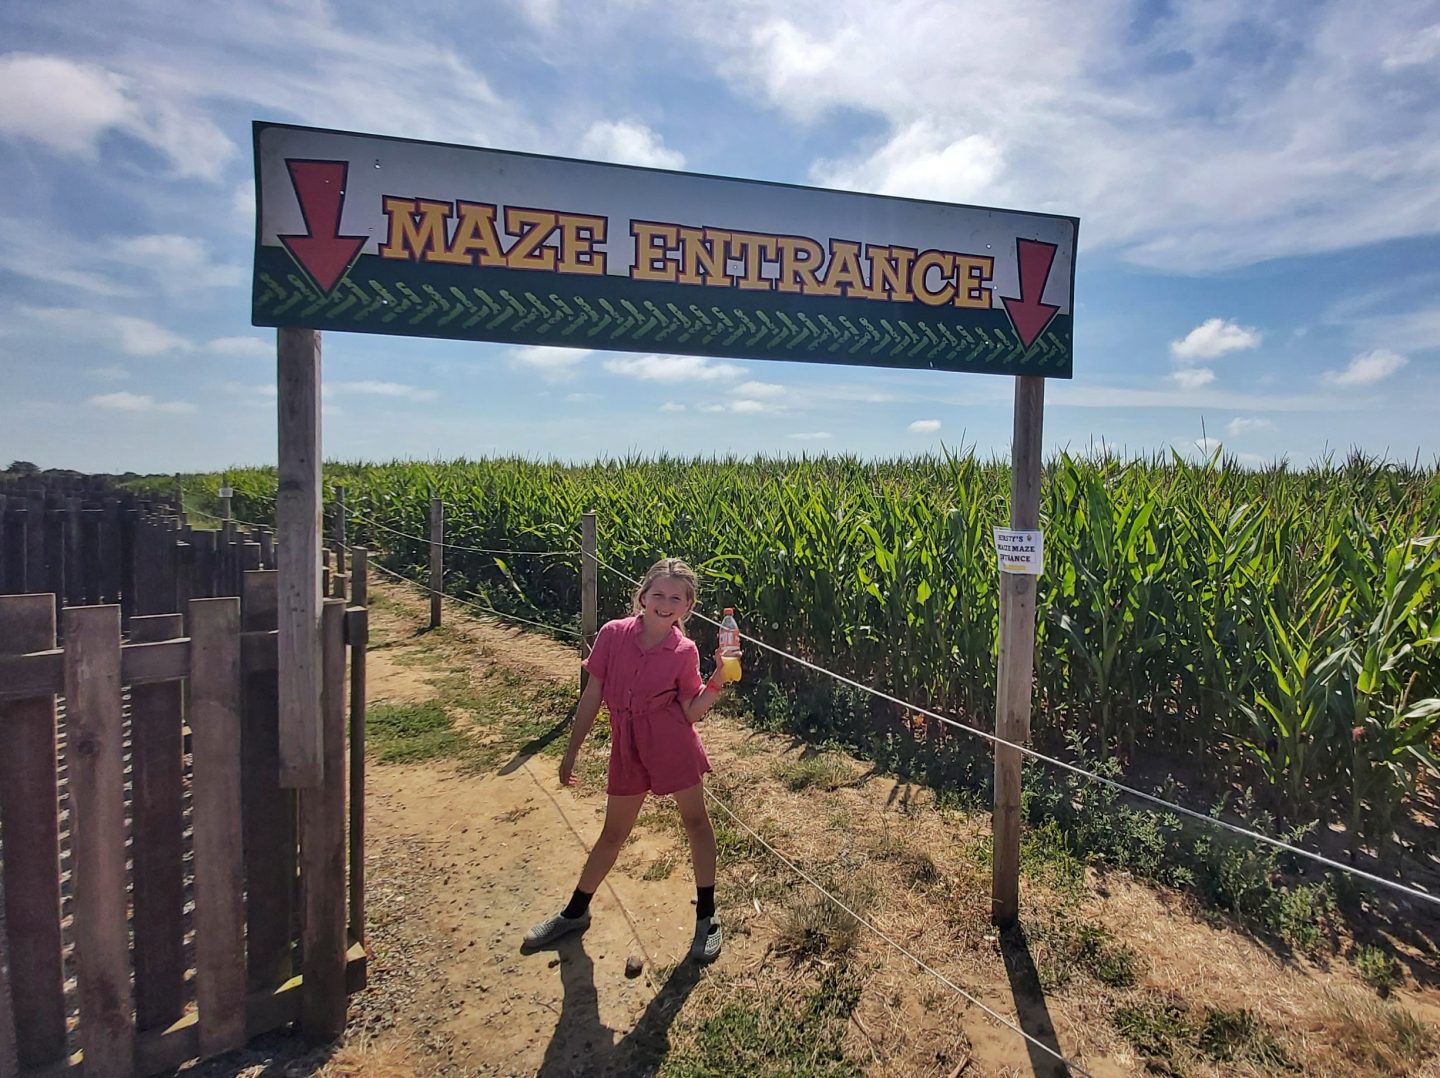 Girl by the entrance to the maize maze at Hirsty's family fun park